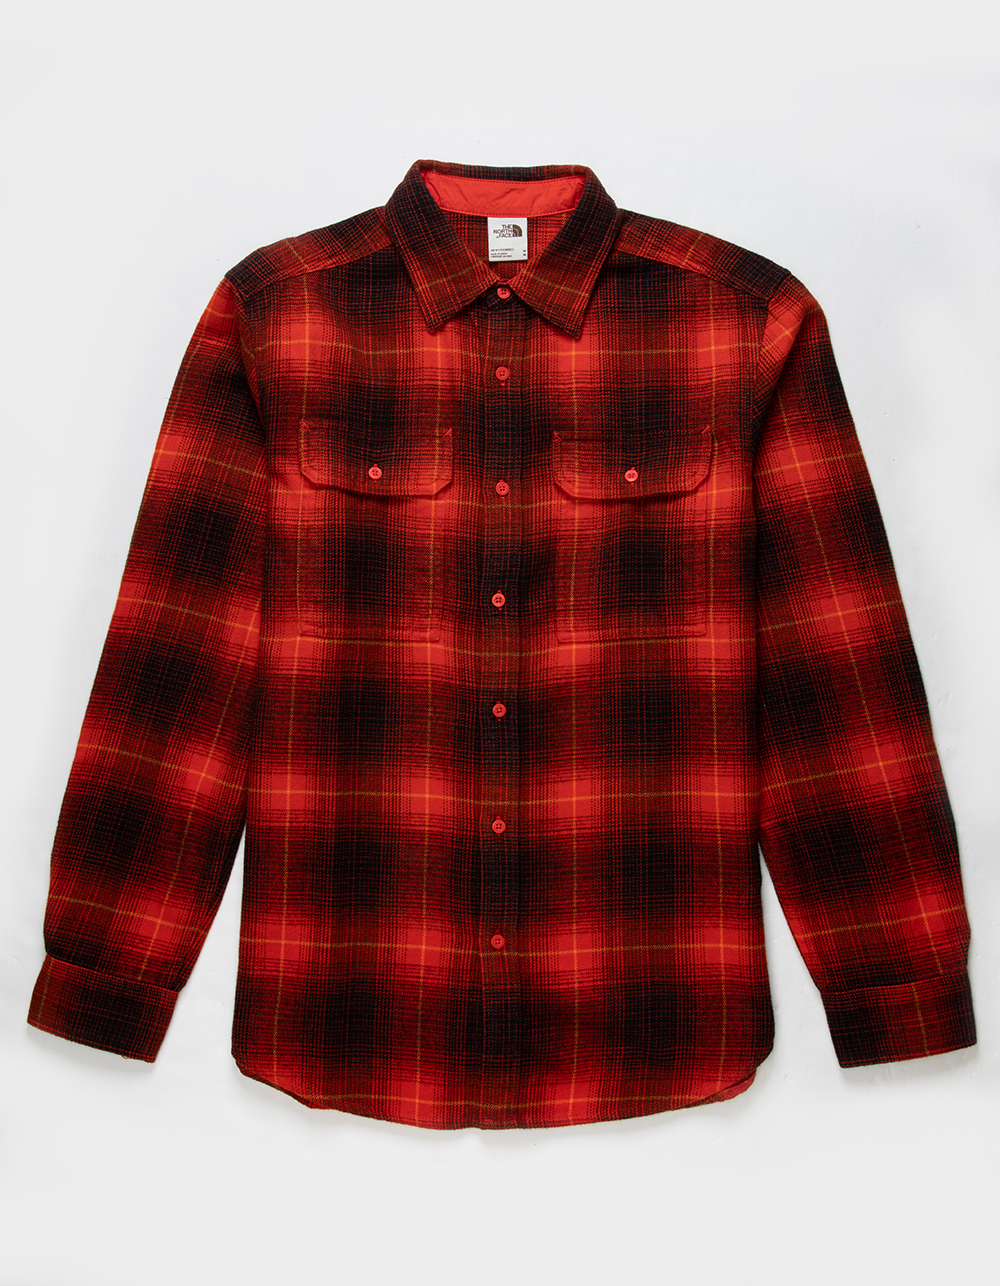 THE NORTH FACE Arroyo Mens Flannel - RED | Tillys